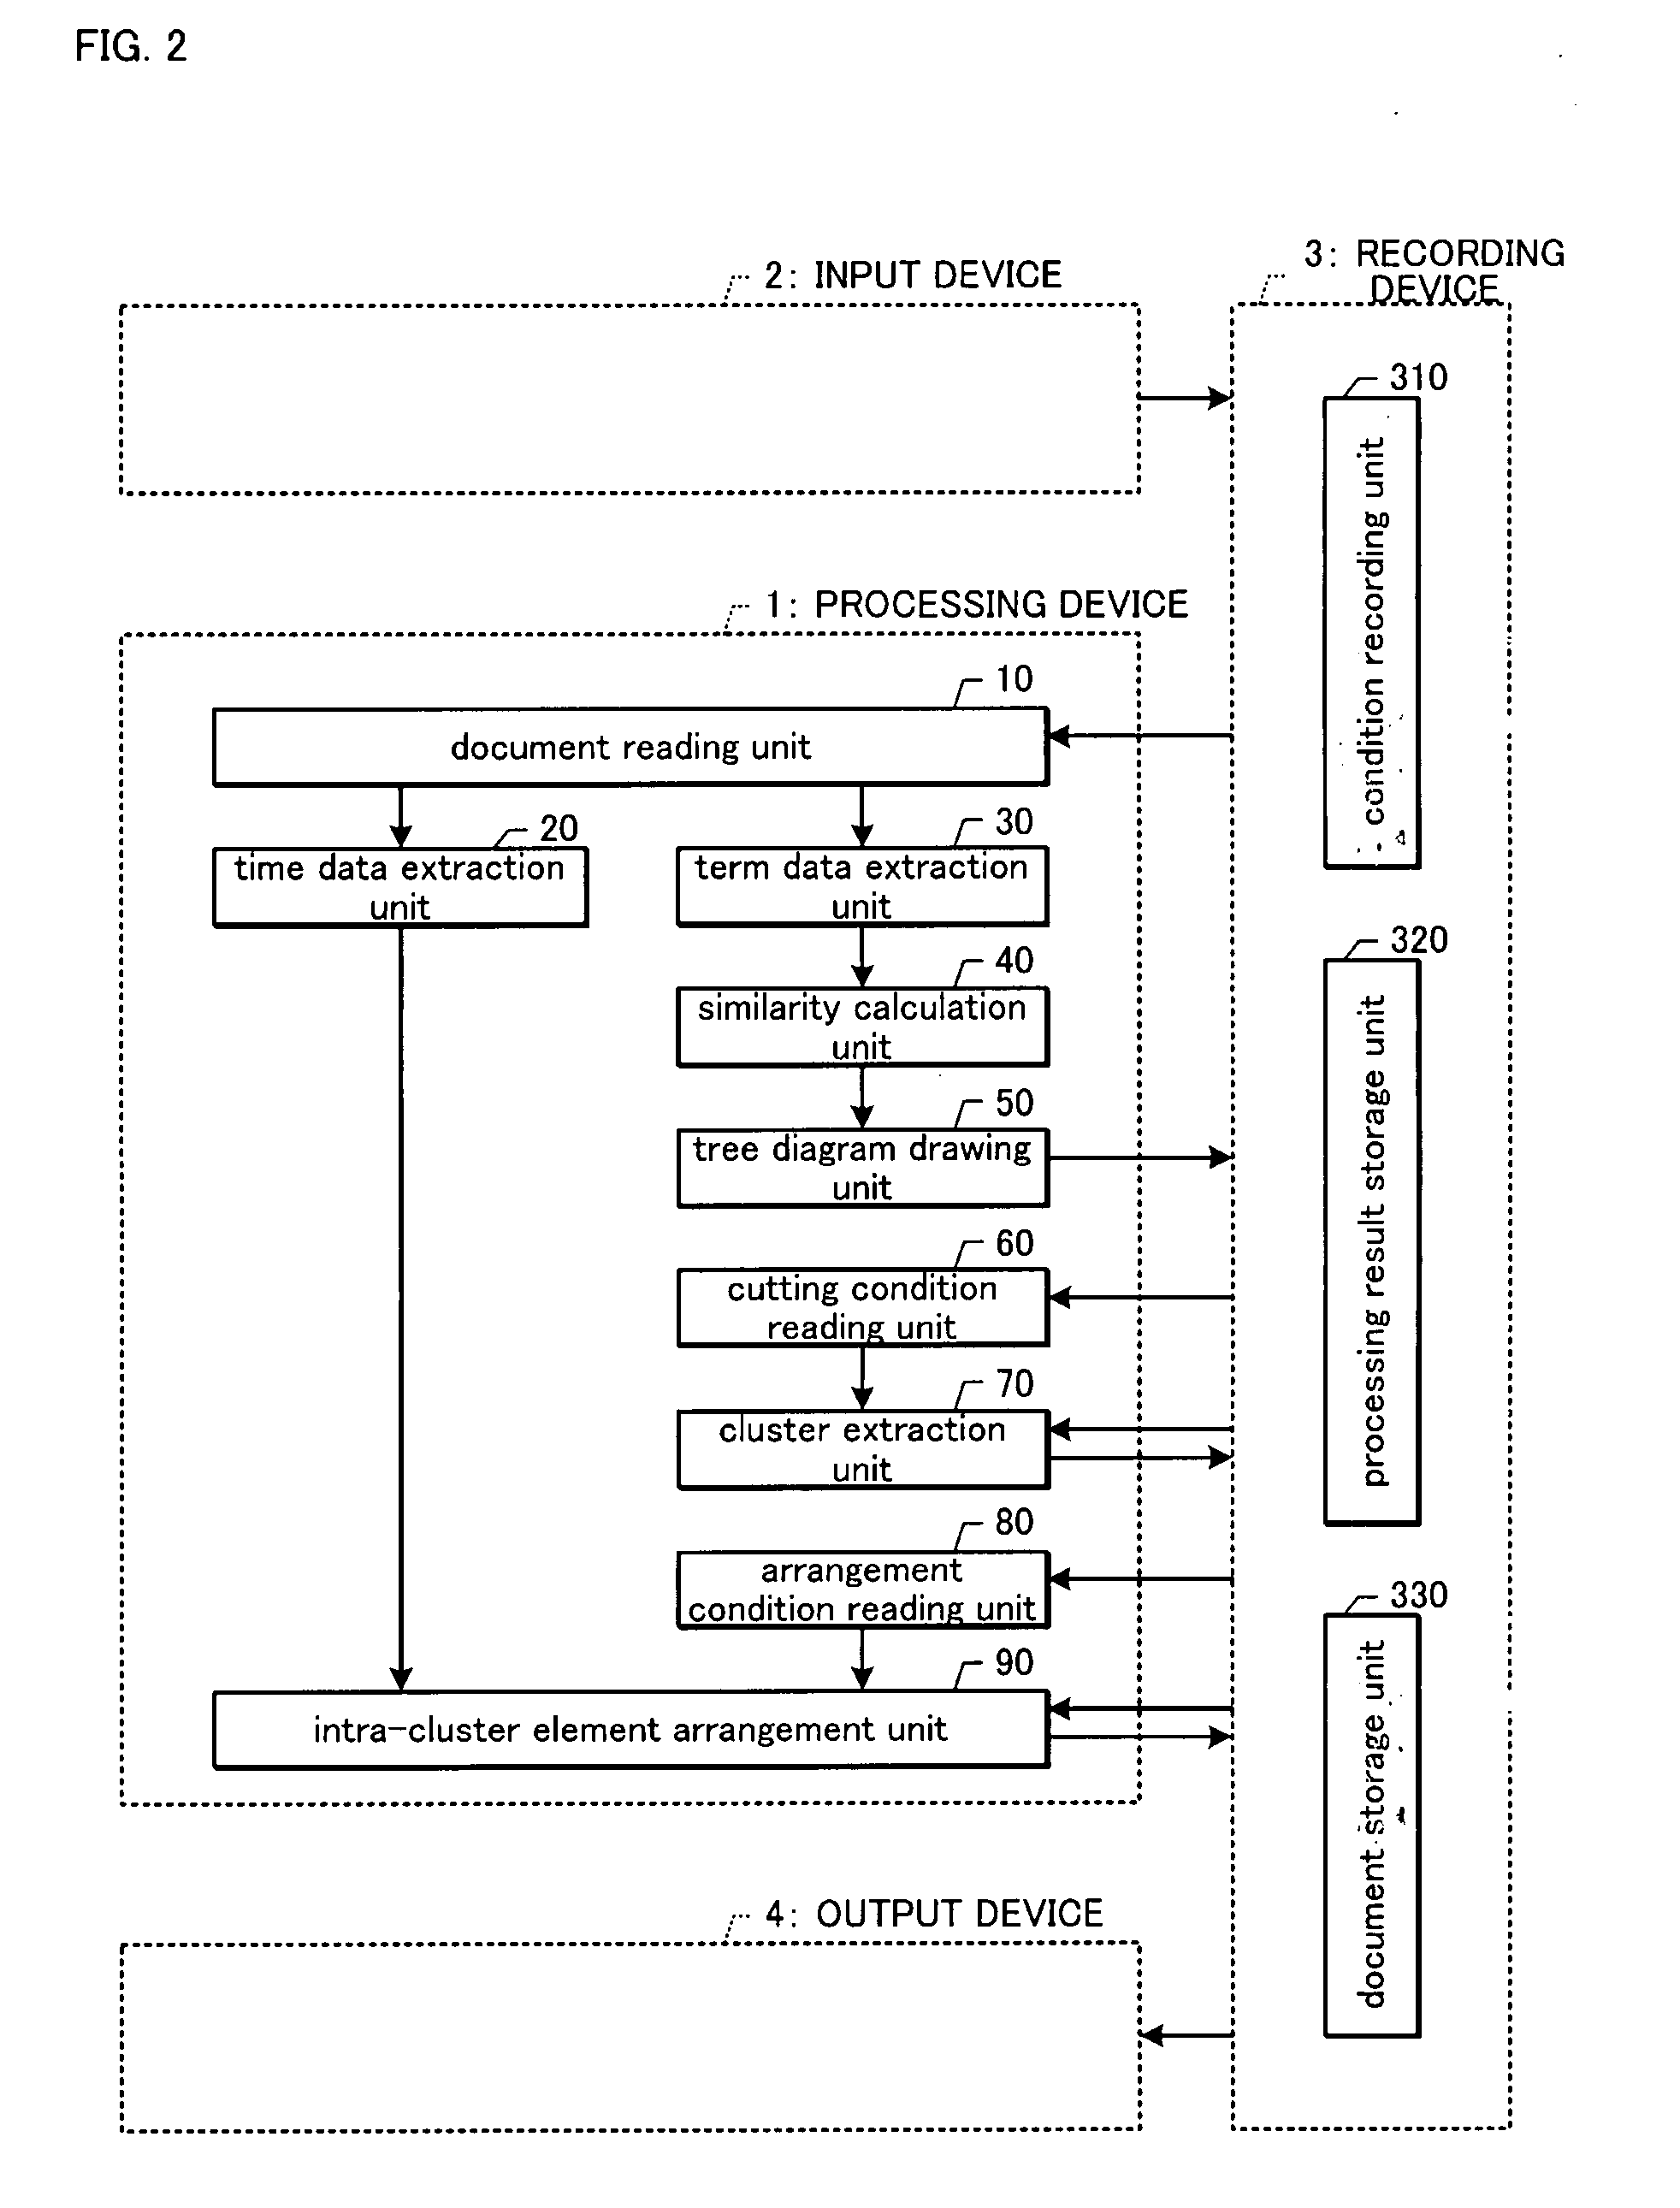 Drawing Device for Relationship Diagram of Documents Arranging the Documents in Chronolgical Order